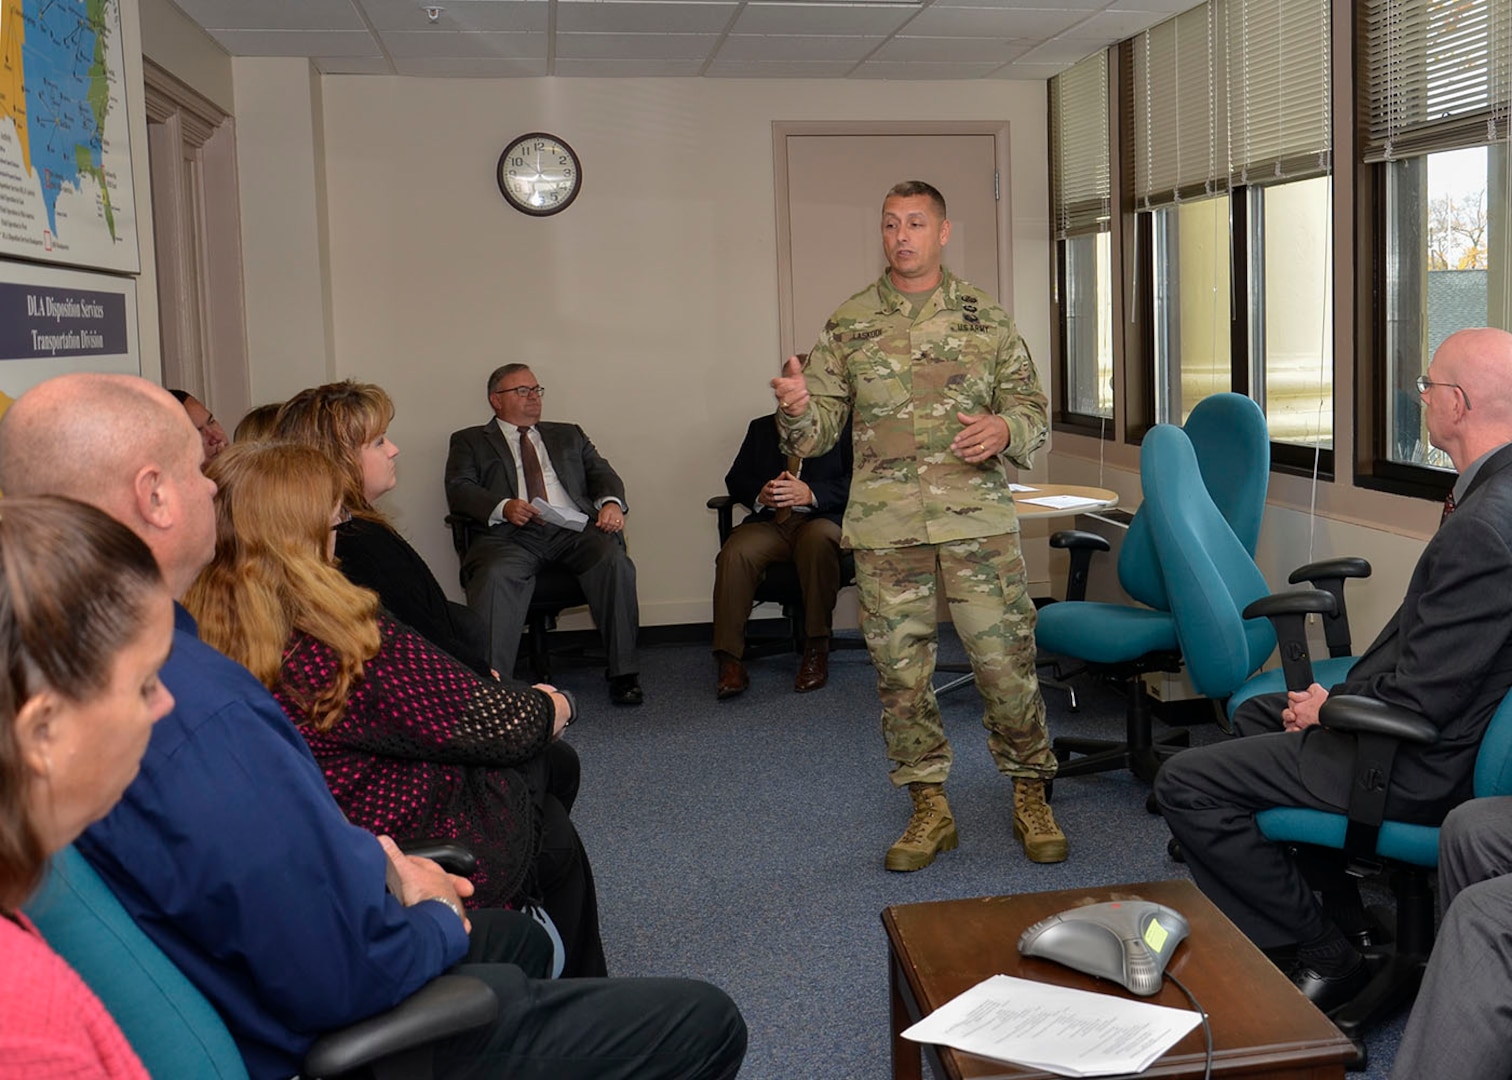 Army Brig. Gen. John S. Laskodi, commanding general, Defense Logistics Agency Distribution, meets with his Battle Creek, Michigan, workforce and thanks them for their support to DLA Disposition Services during a site visit Oct. 25.